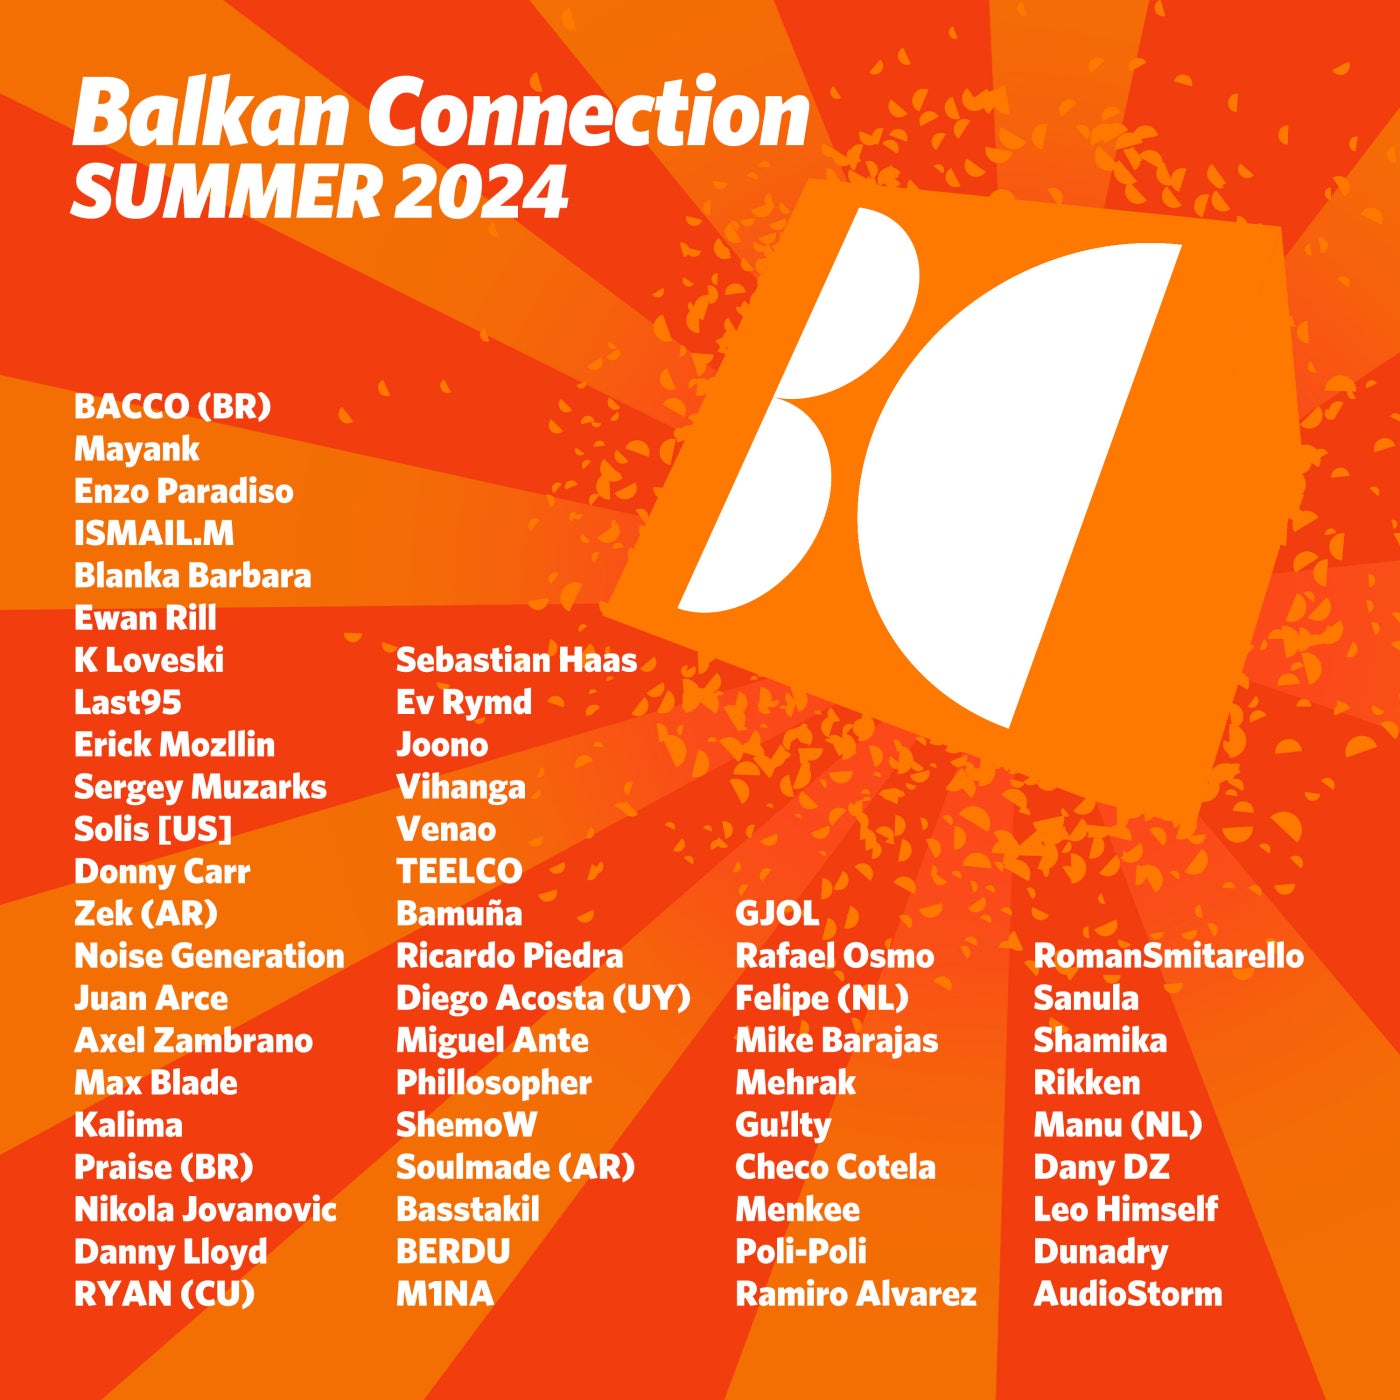 image cover: VA - Balkan Connection Summer 2024 on Balkan Connection